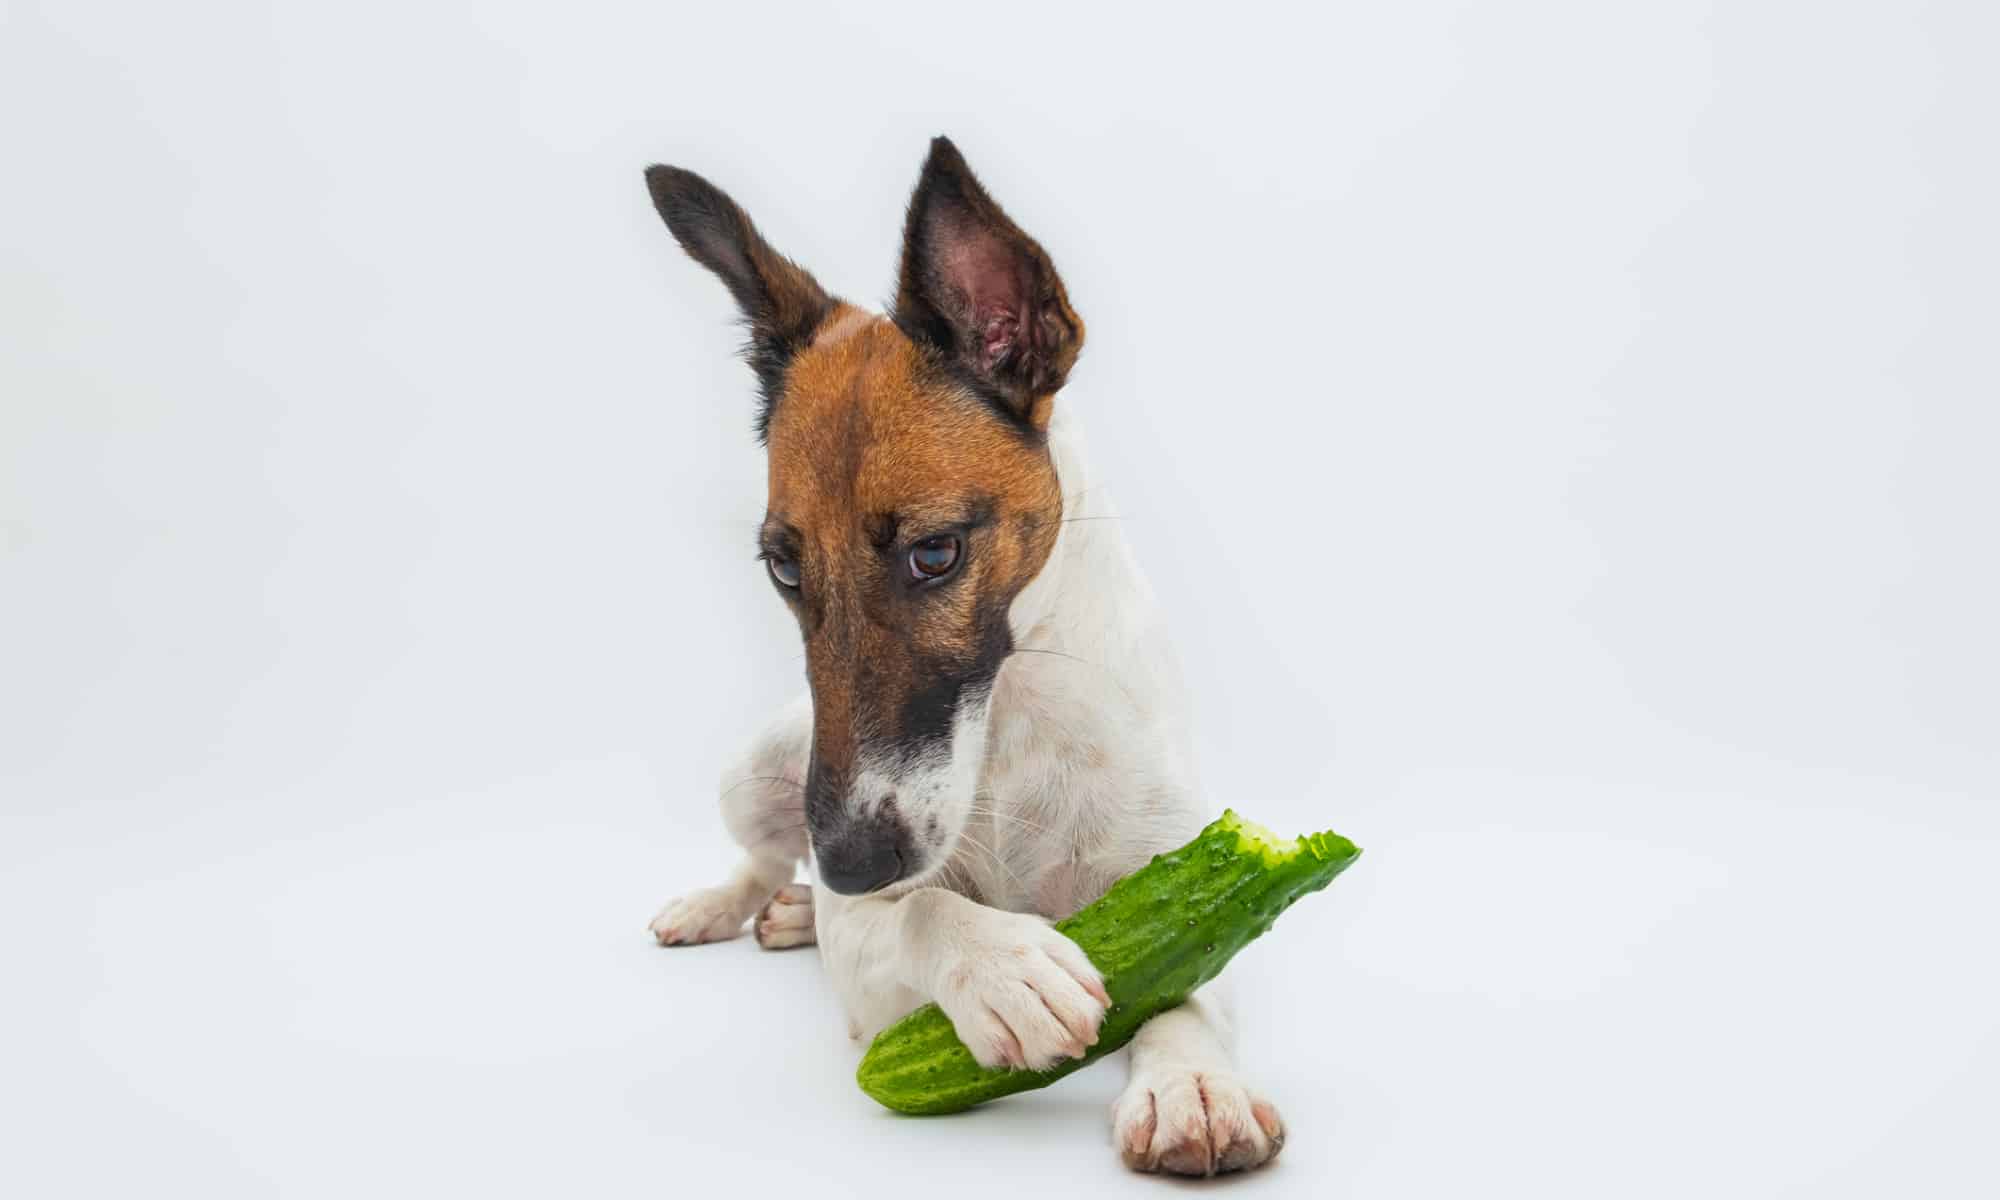 Dog lying down holding partially eaten cucumber under a paw